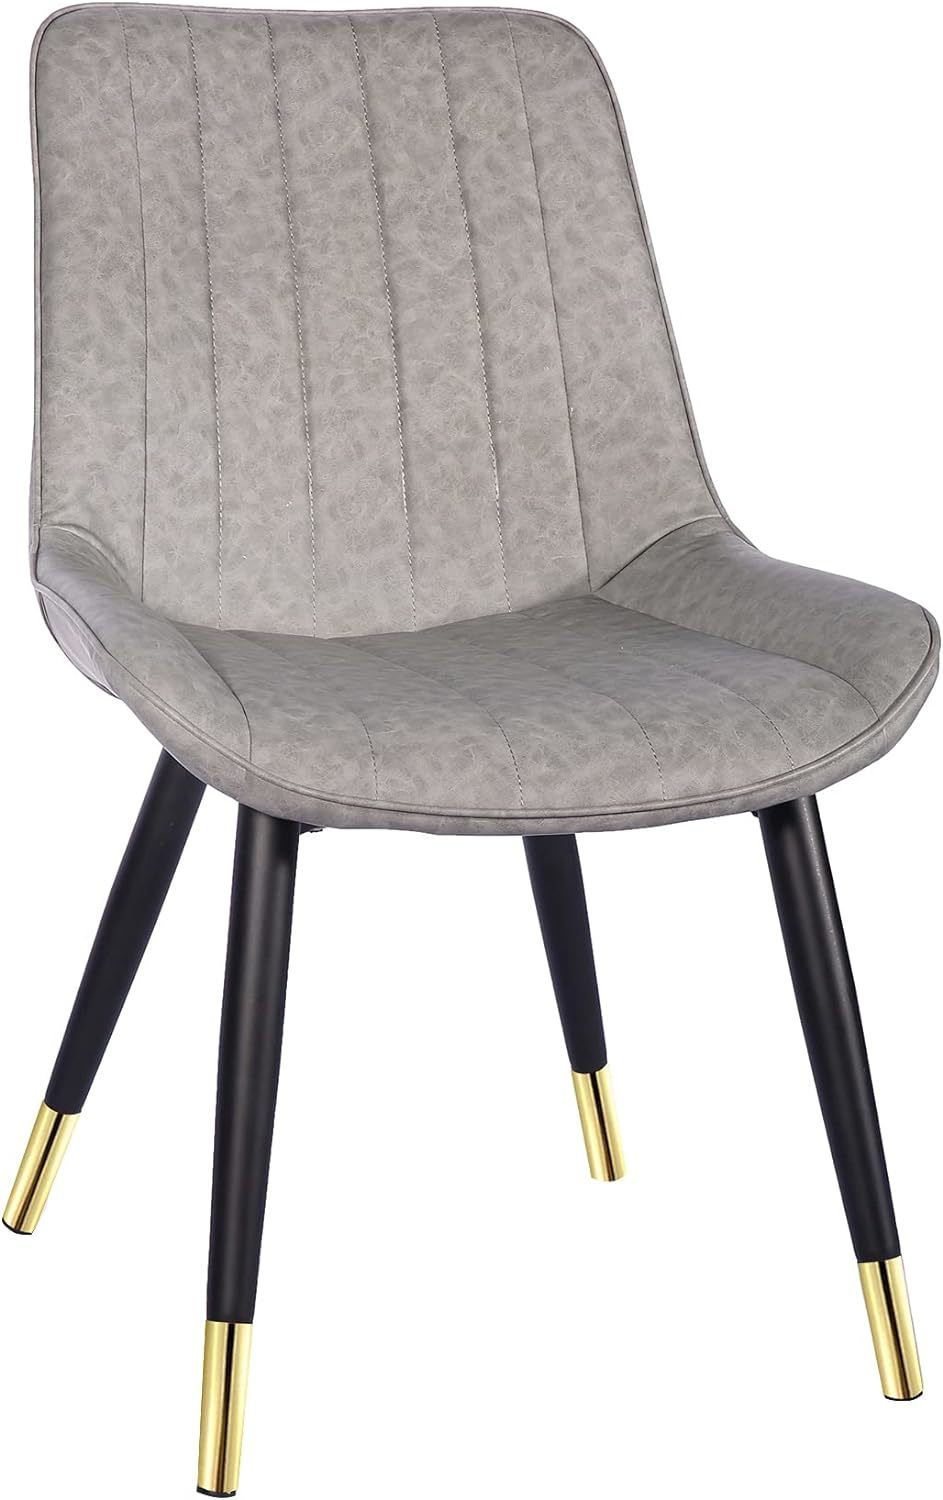 Primary image for Gia Retro Armless Upholstered Side Dining Chair, Number 1, Gray, Vegan Leather.